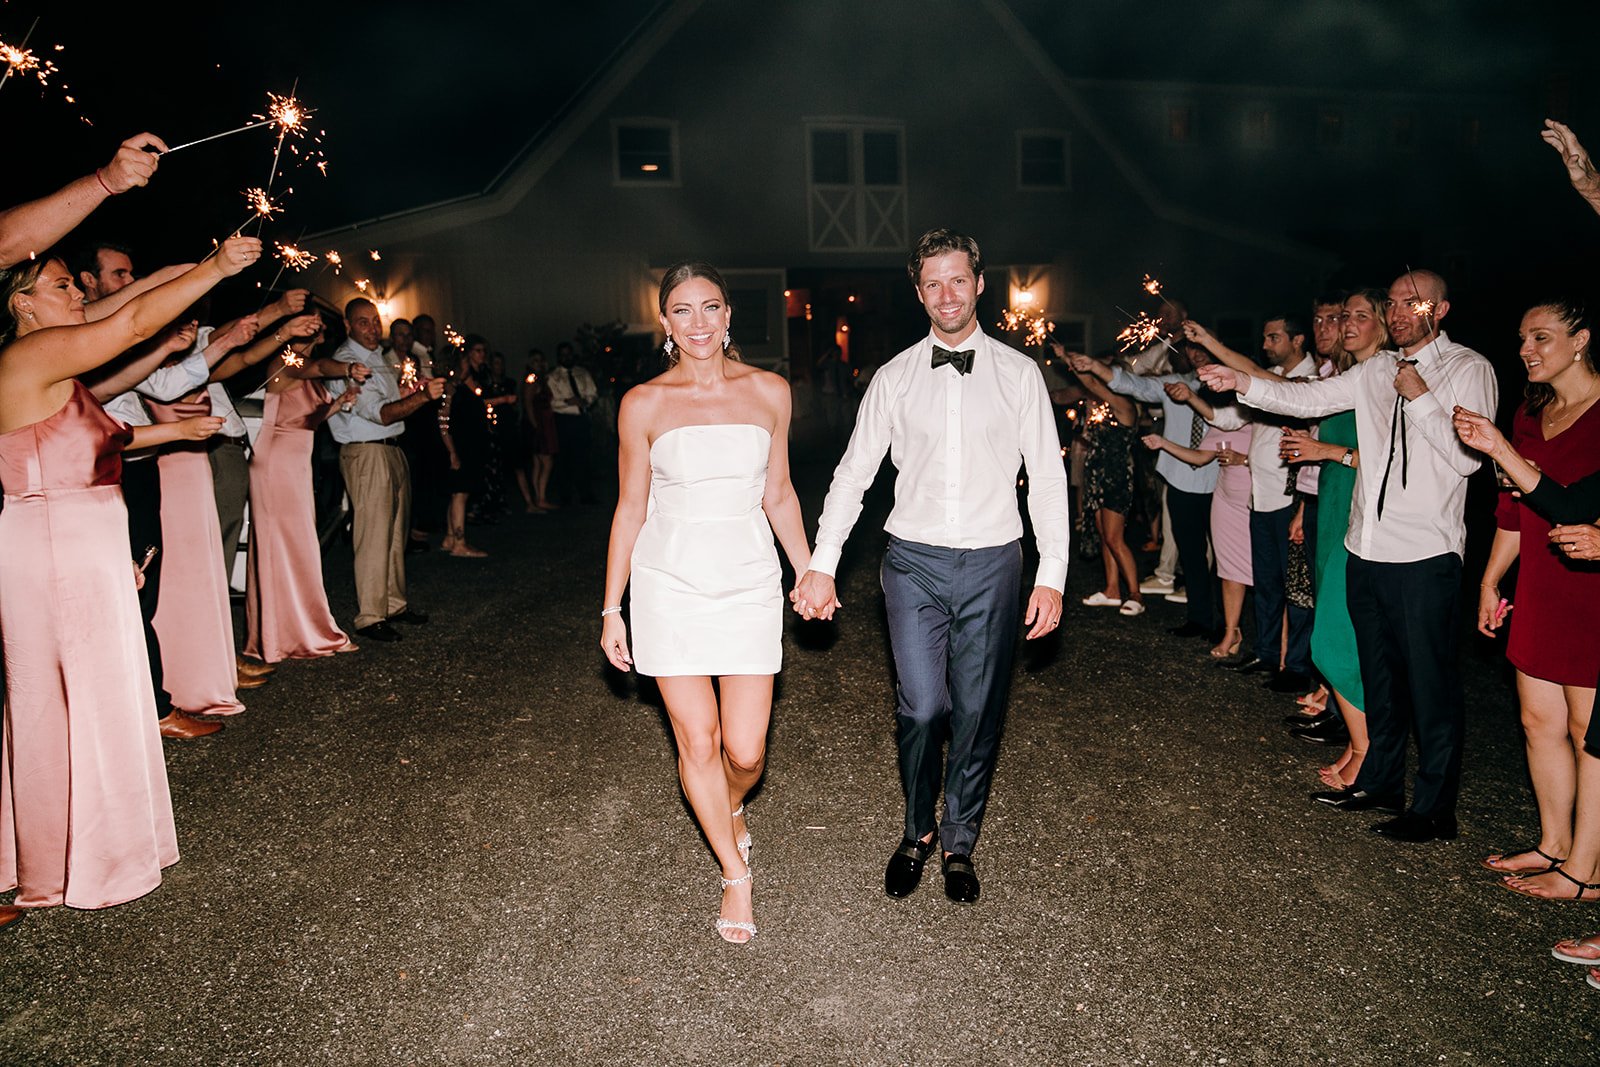 bride and groom grand exit from wedding reception with sparklers